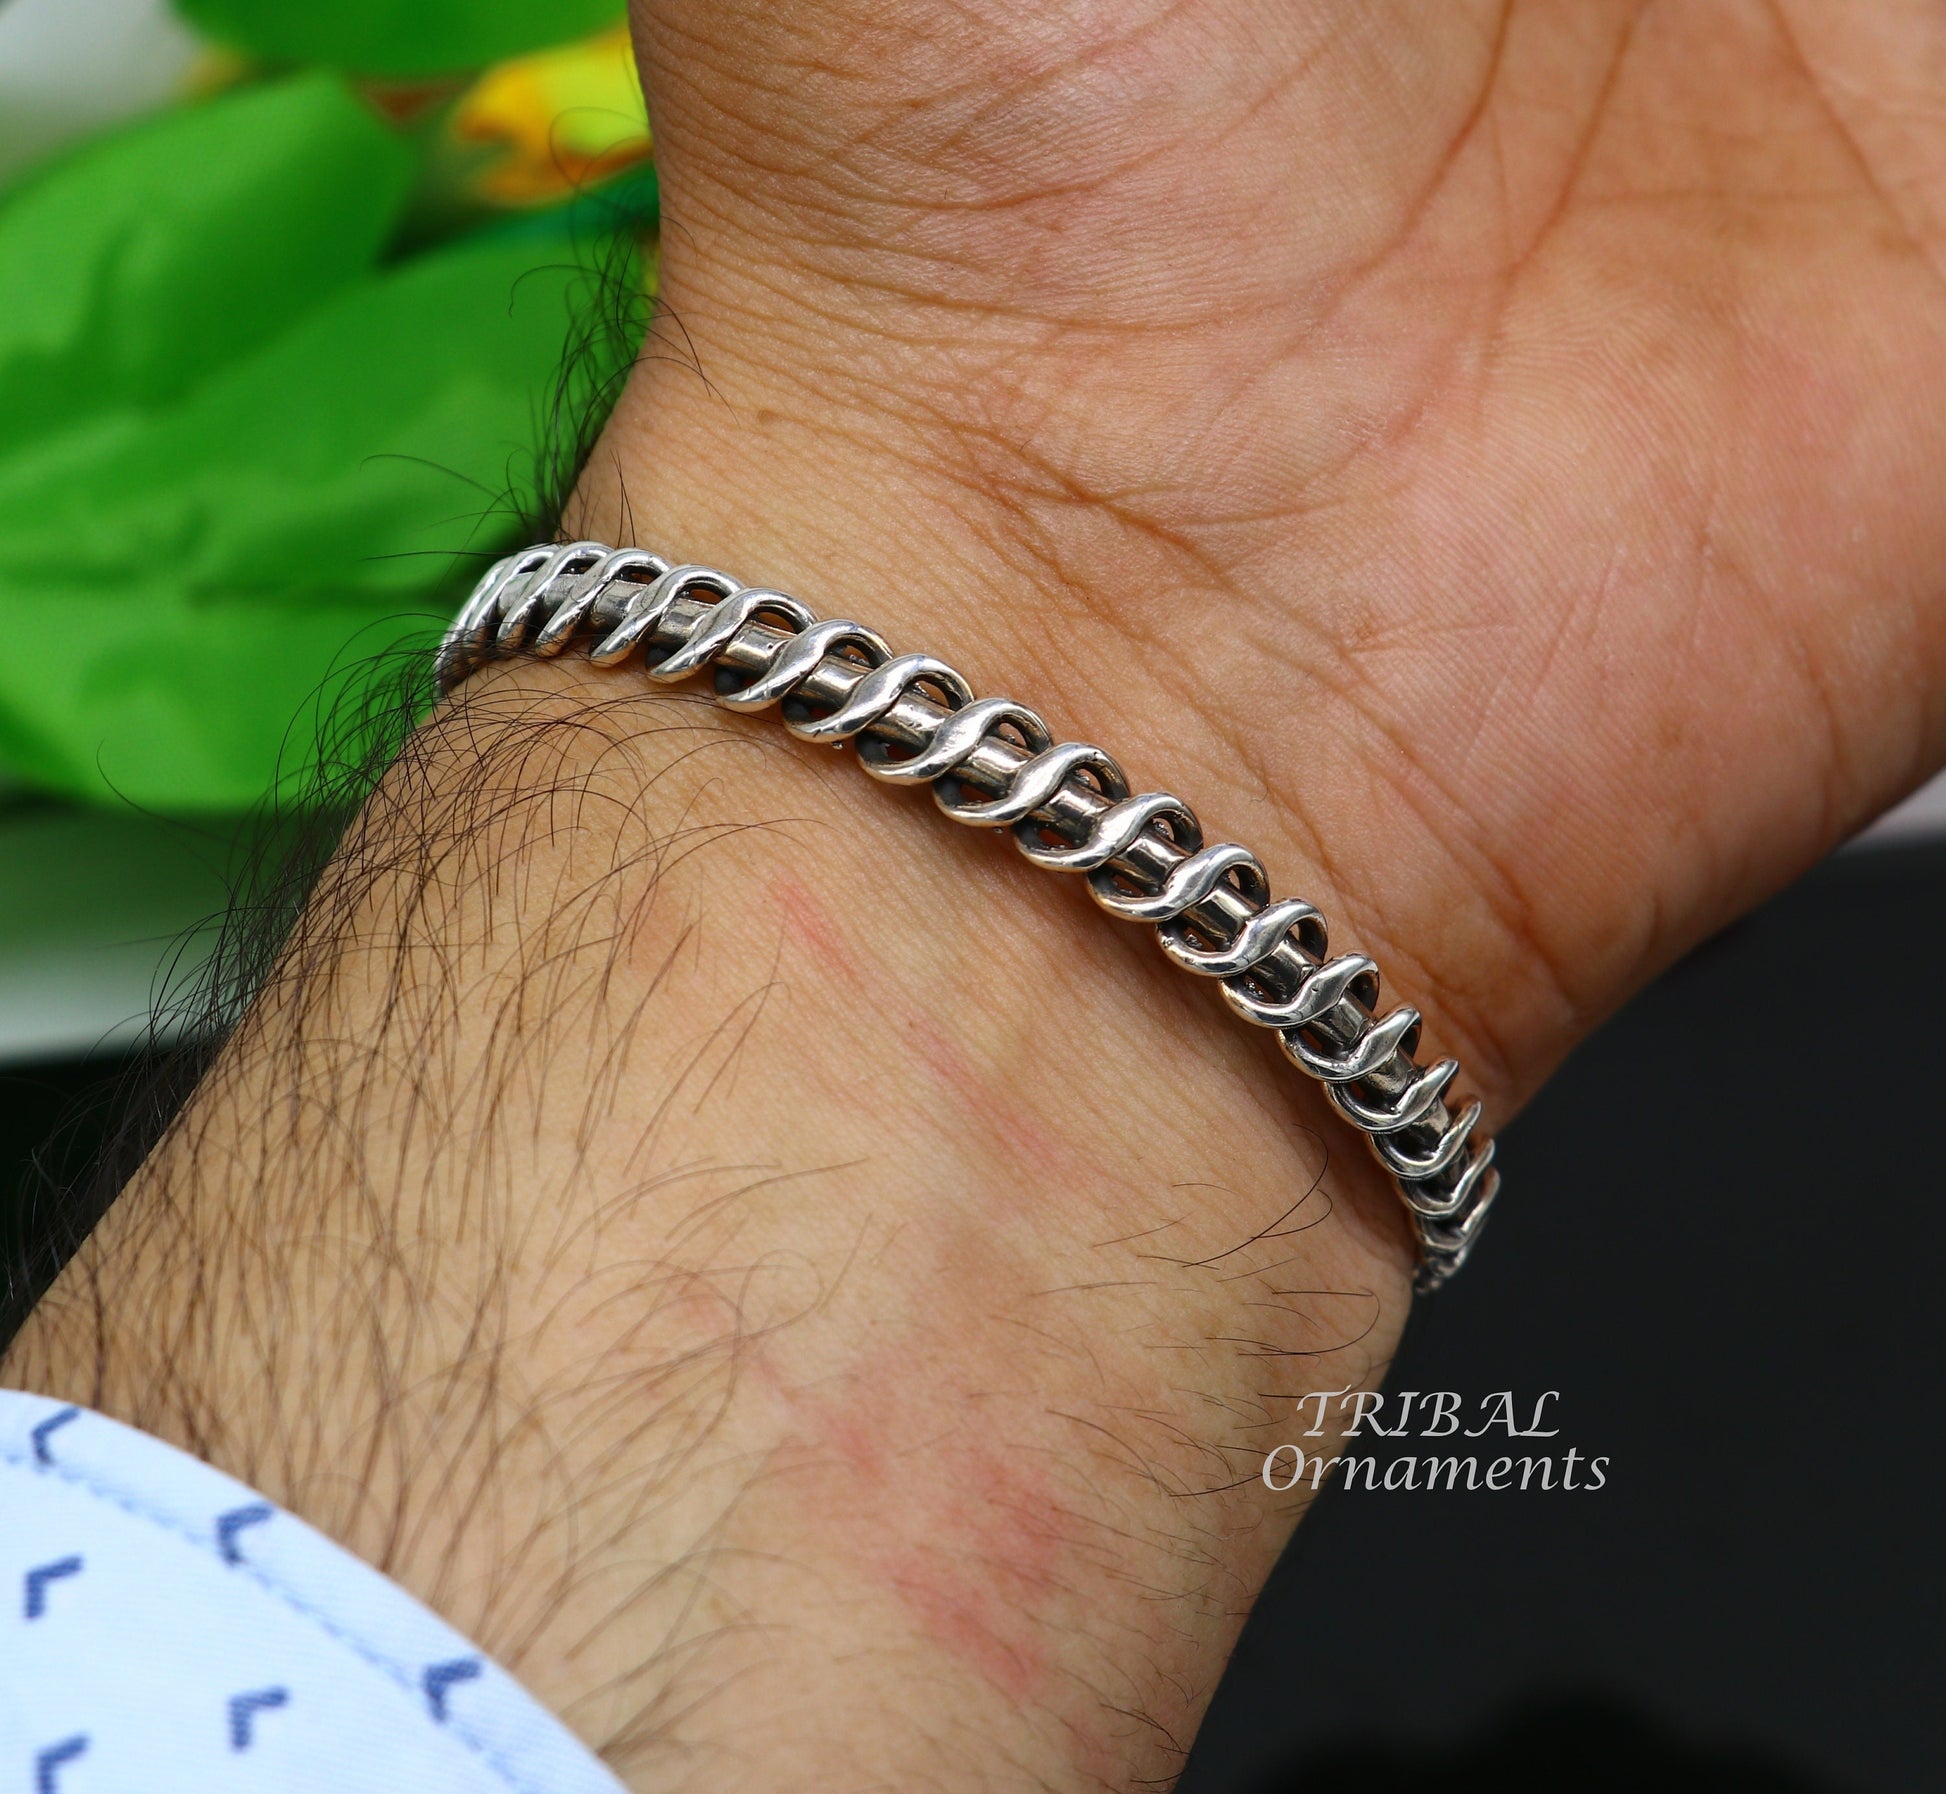 Vintage unique design stylish cuff kada adjustable bracelet, 925 sterling silver wrist jewelry for boy's and girl's, best gifting  cuff107 - TRIBAL ORNAMENTS